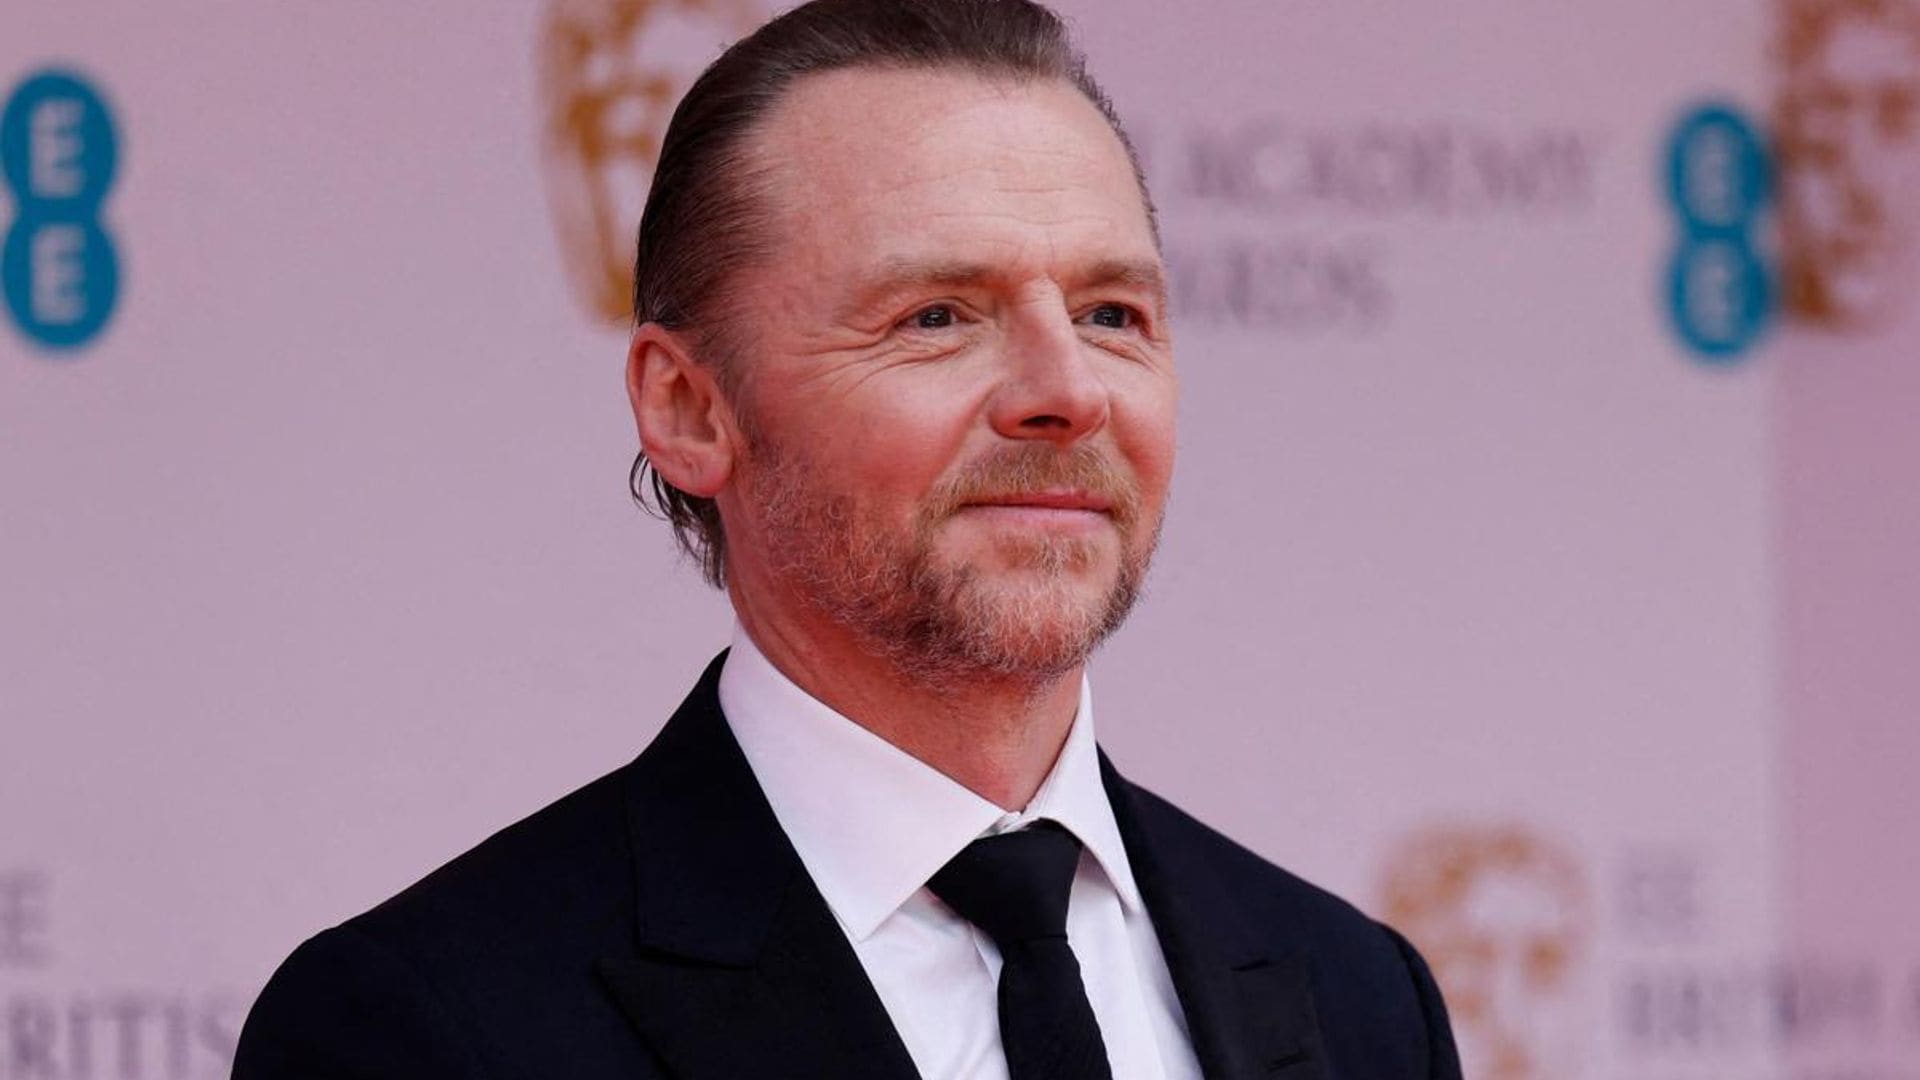 Mission Impossible: Simon Pegg hints at the role of Artificial Intelligence in the film